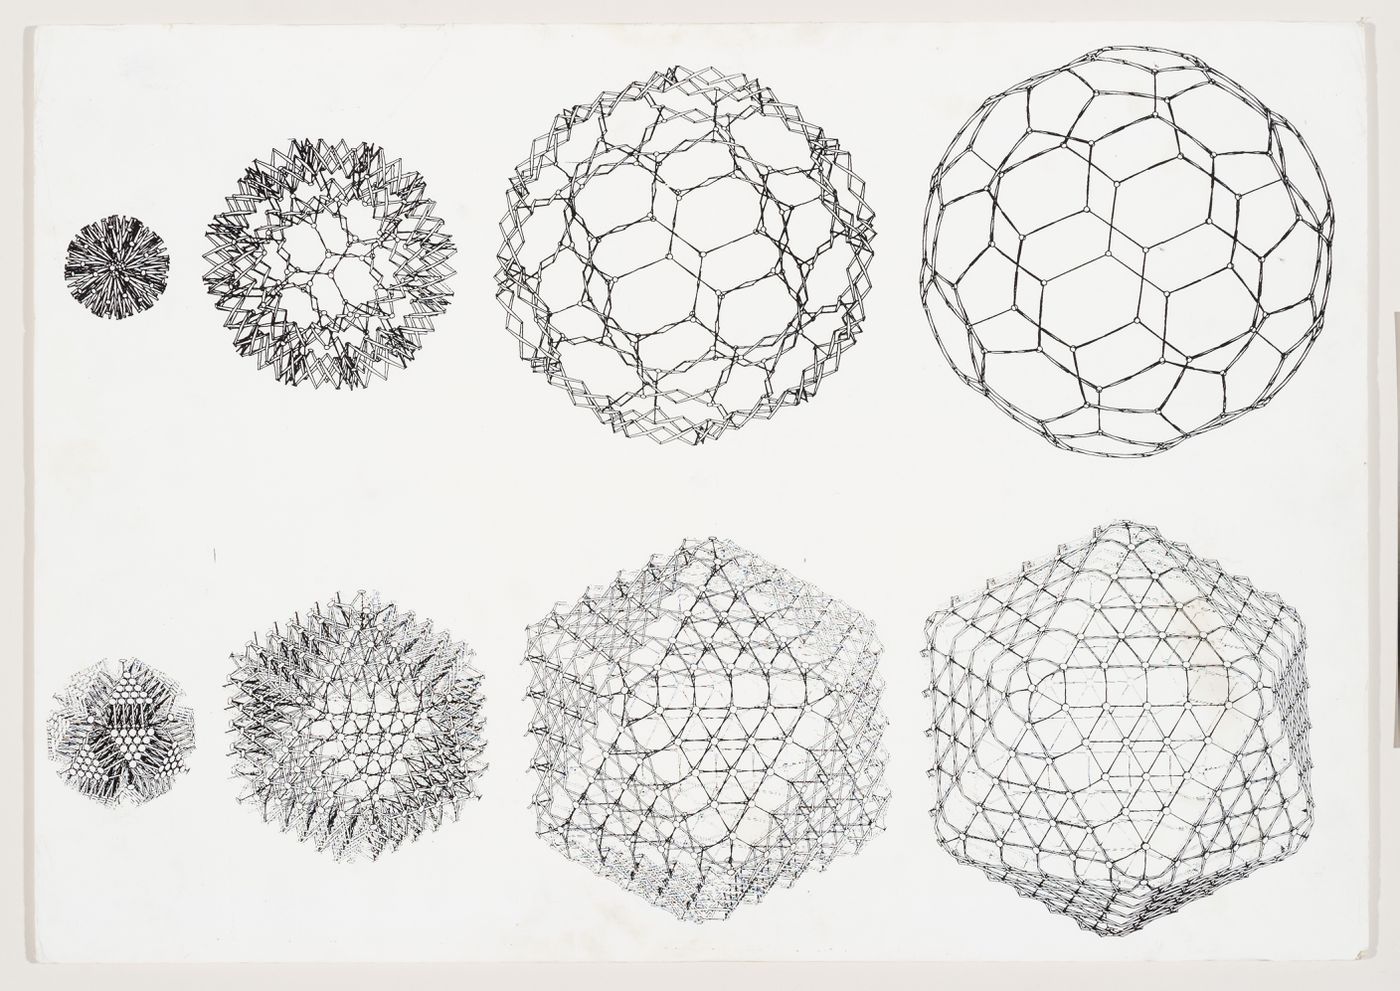 Perspective views of an expanding sphere and an expanding icosahedral structure.